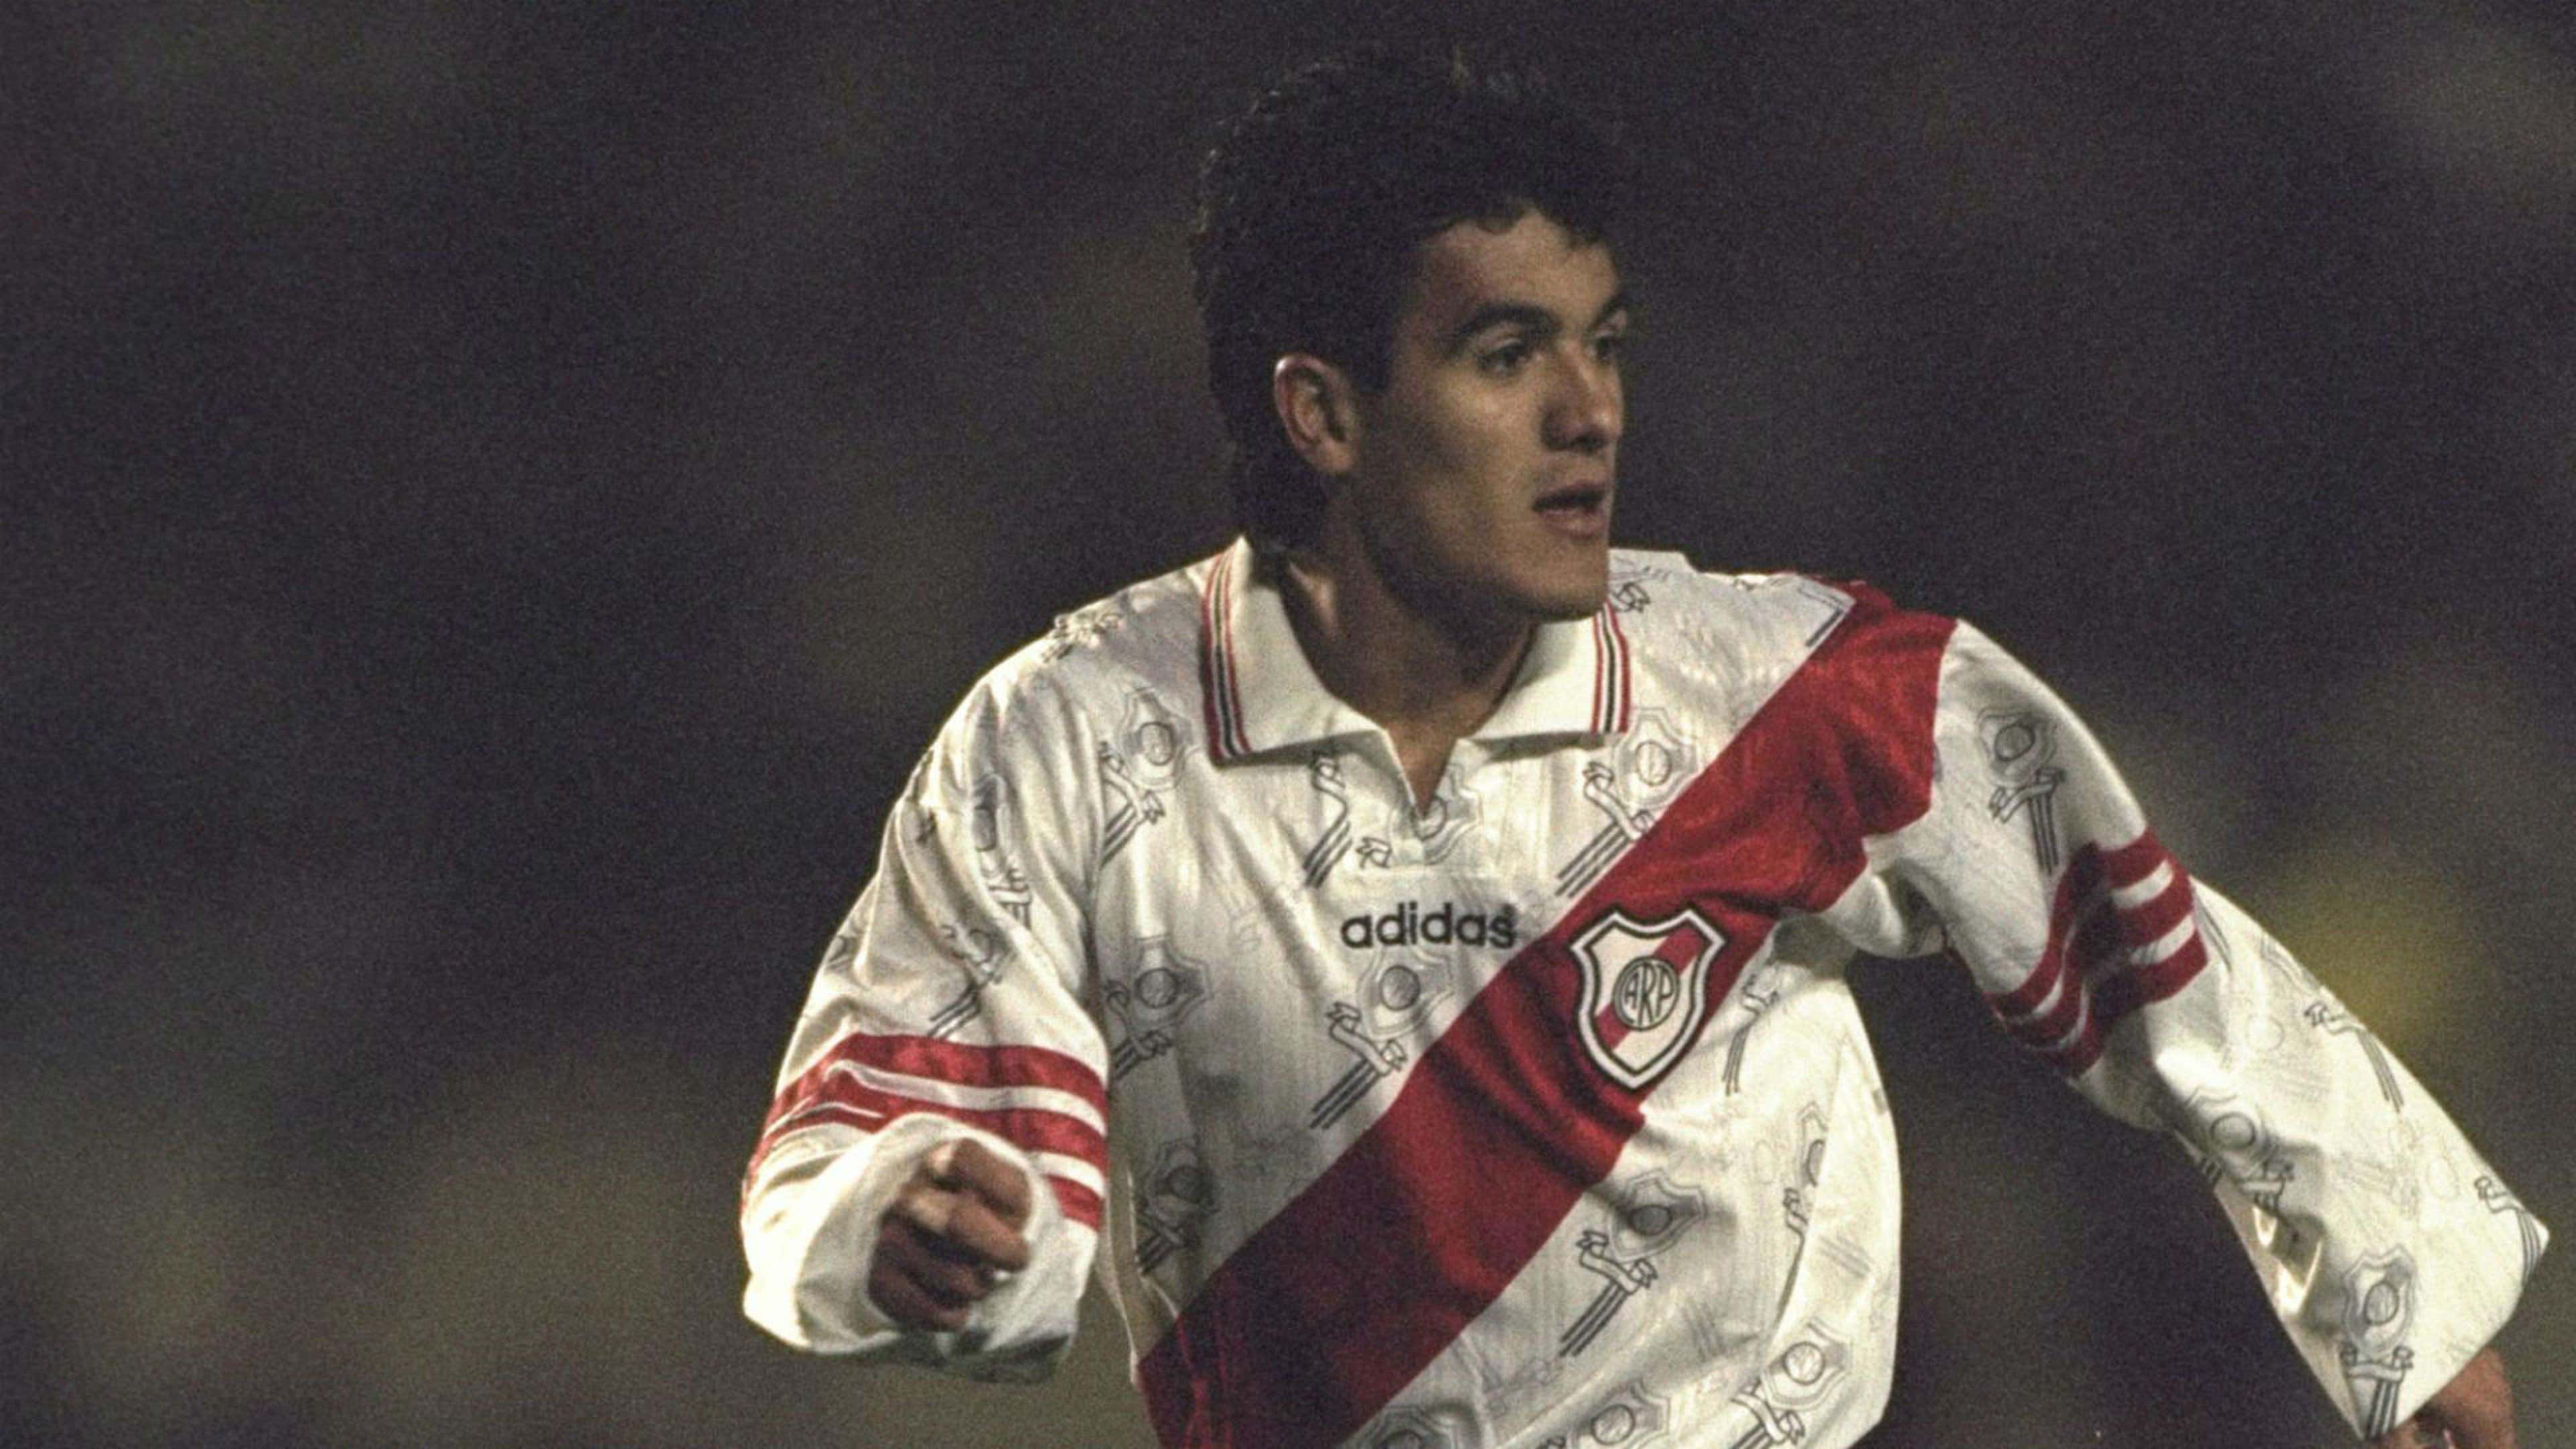 A full line-up of superstars River Plate gave European football